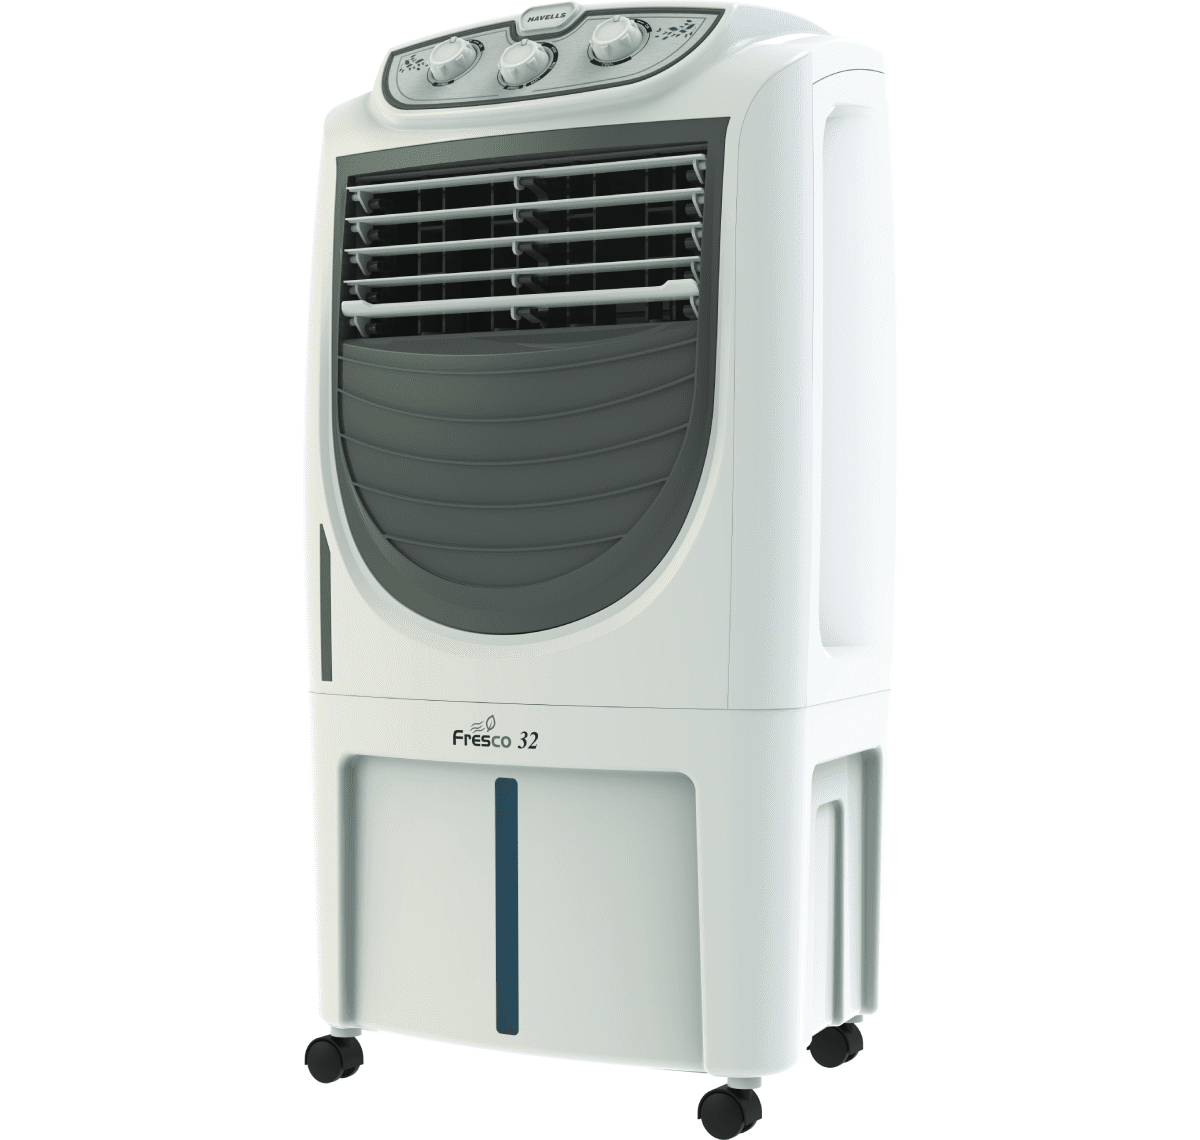 Havells Fresco 32 (32 litre) Personal Air Cooler On Dillimall.Com